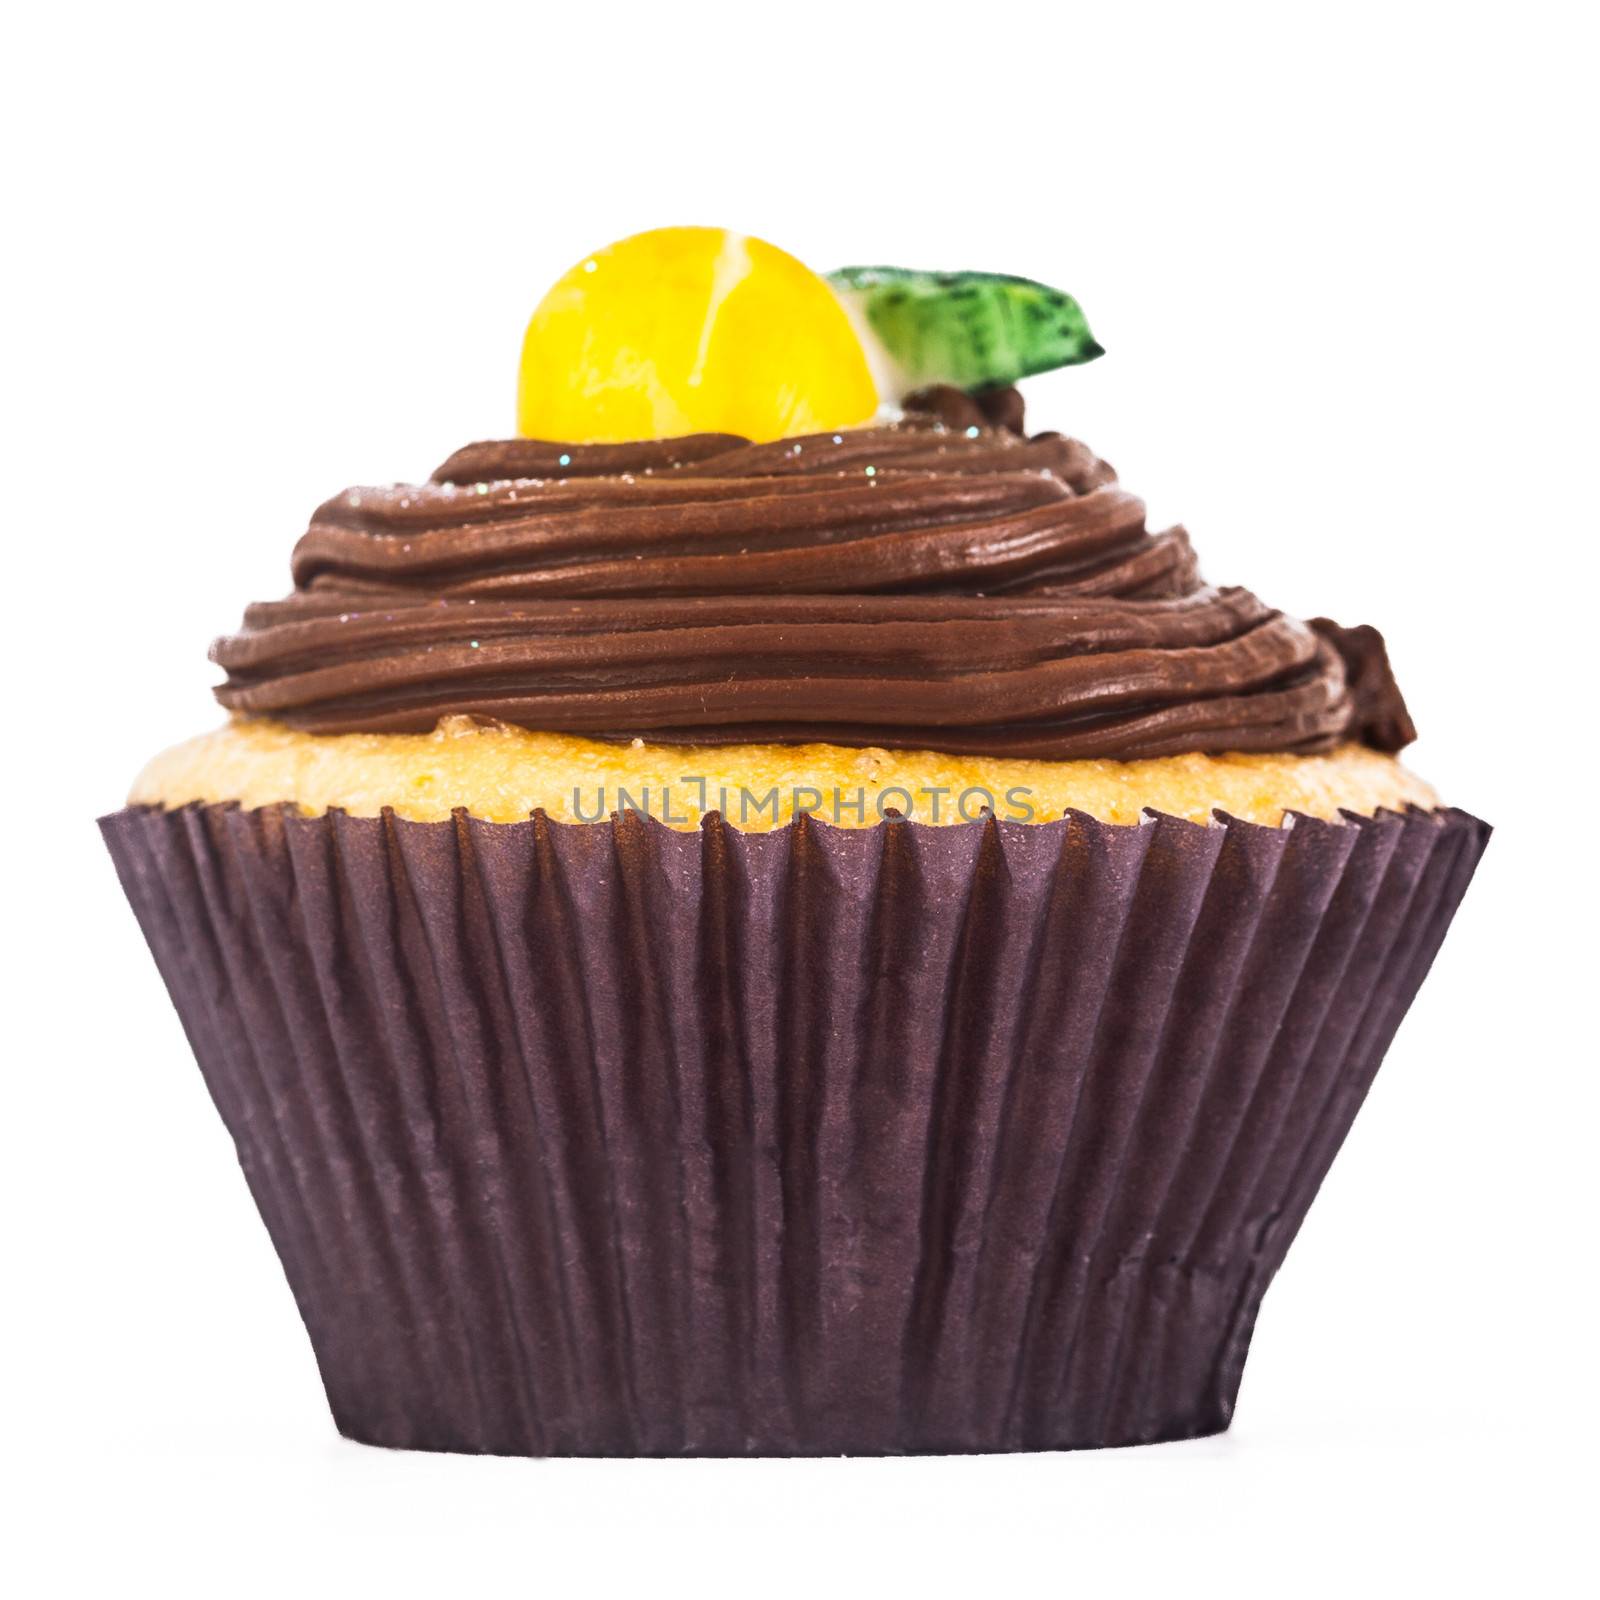 A gorgeous and delicious chocolate and lemon cupcake isolated on a white background.